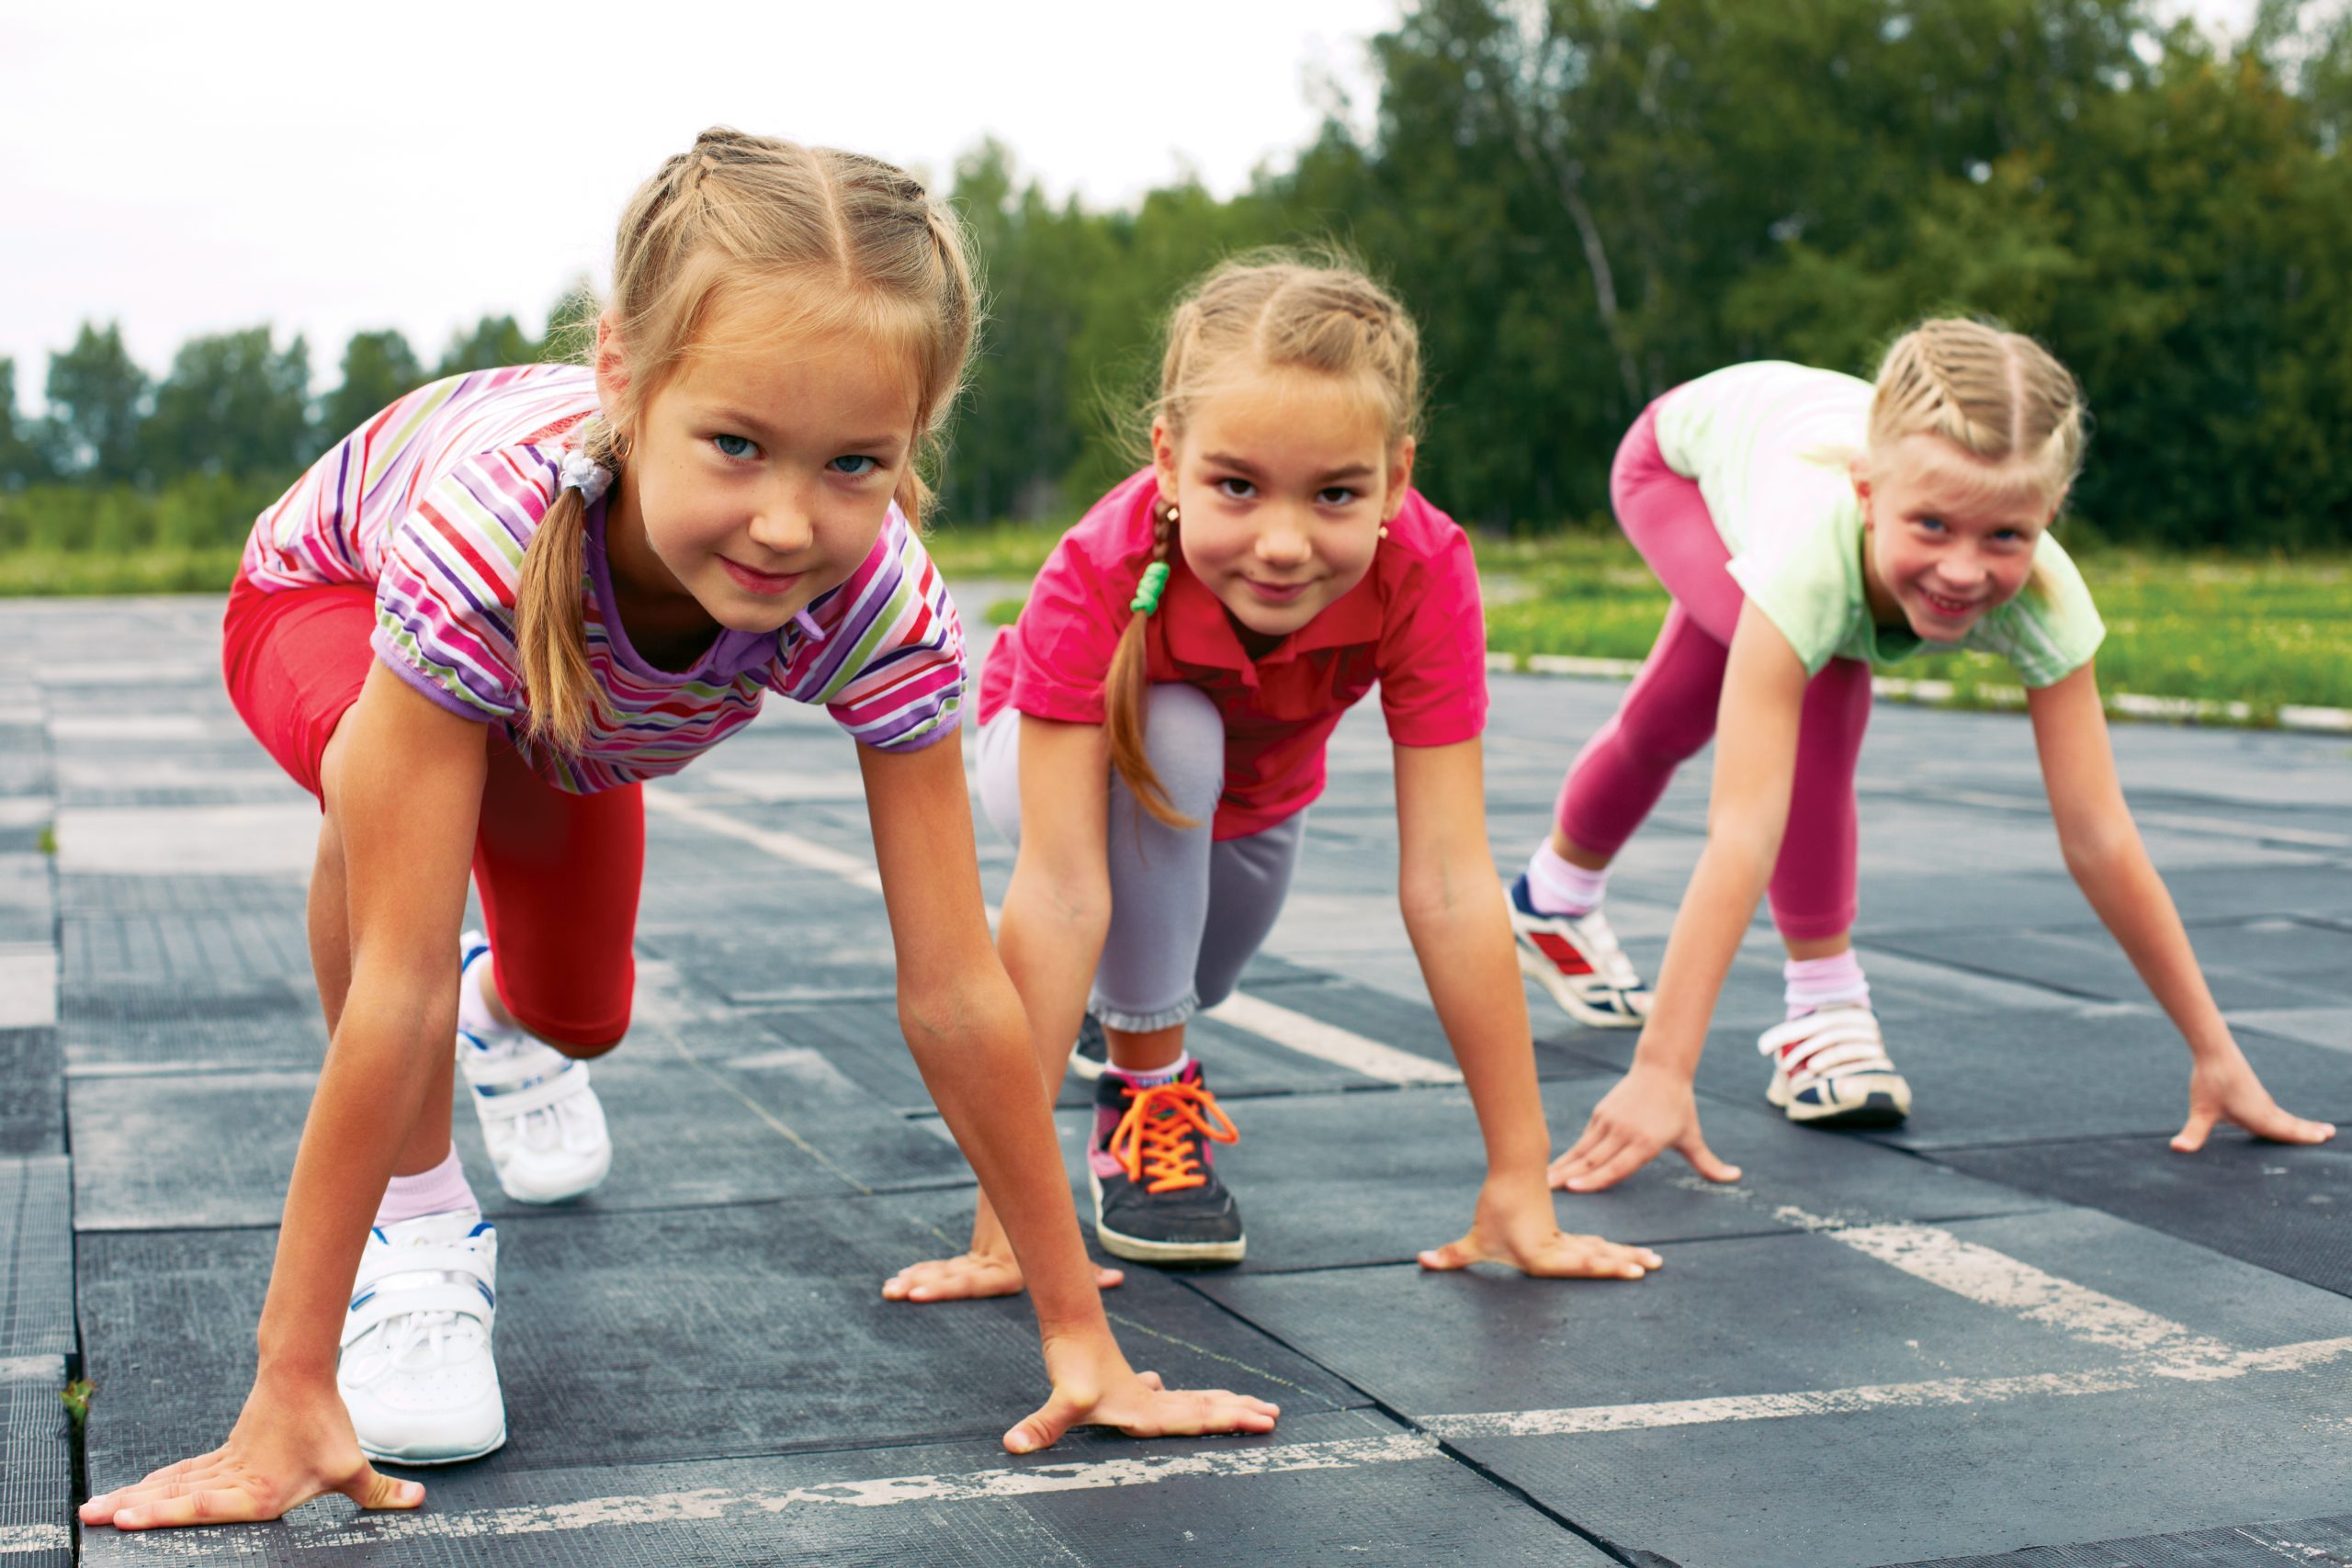 Are Kids' Sports Good for Preschoolers?